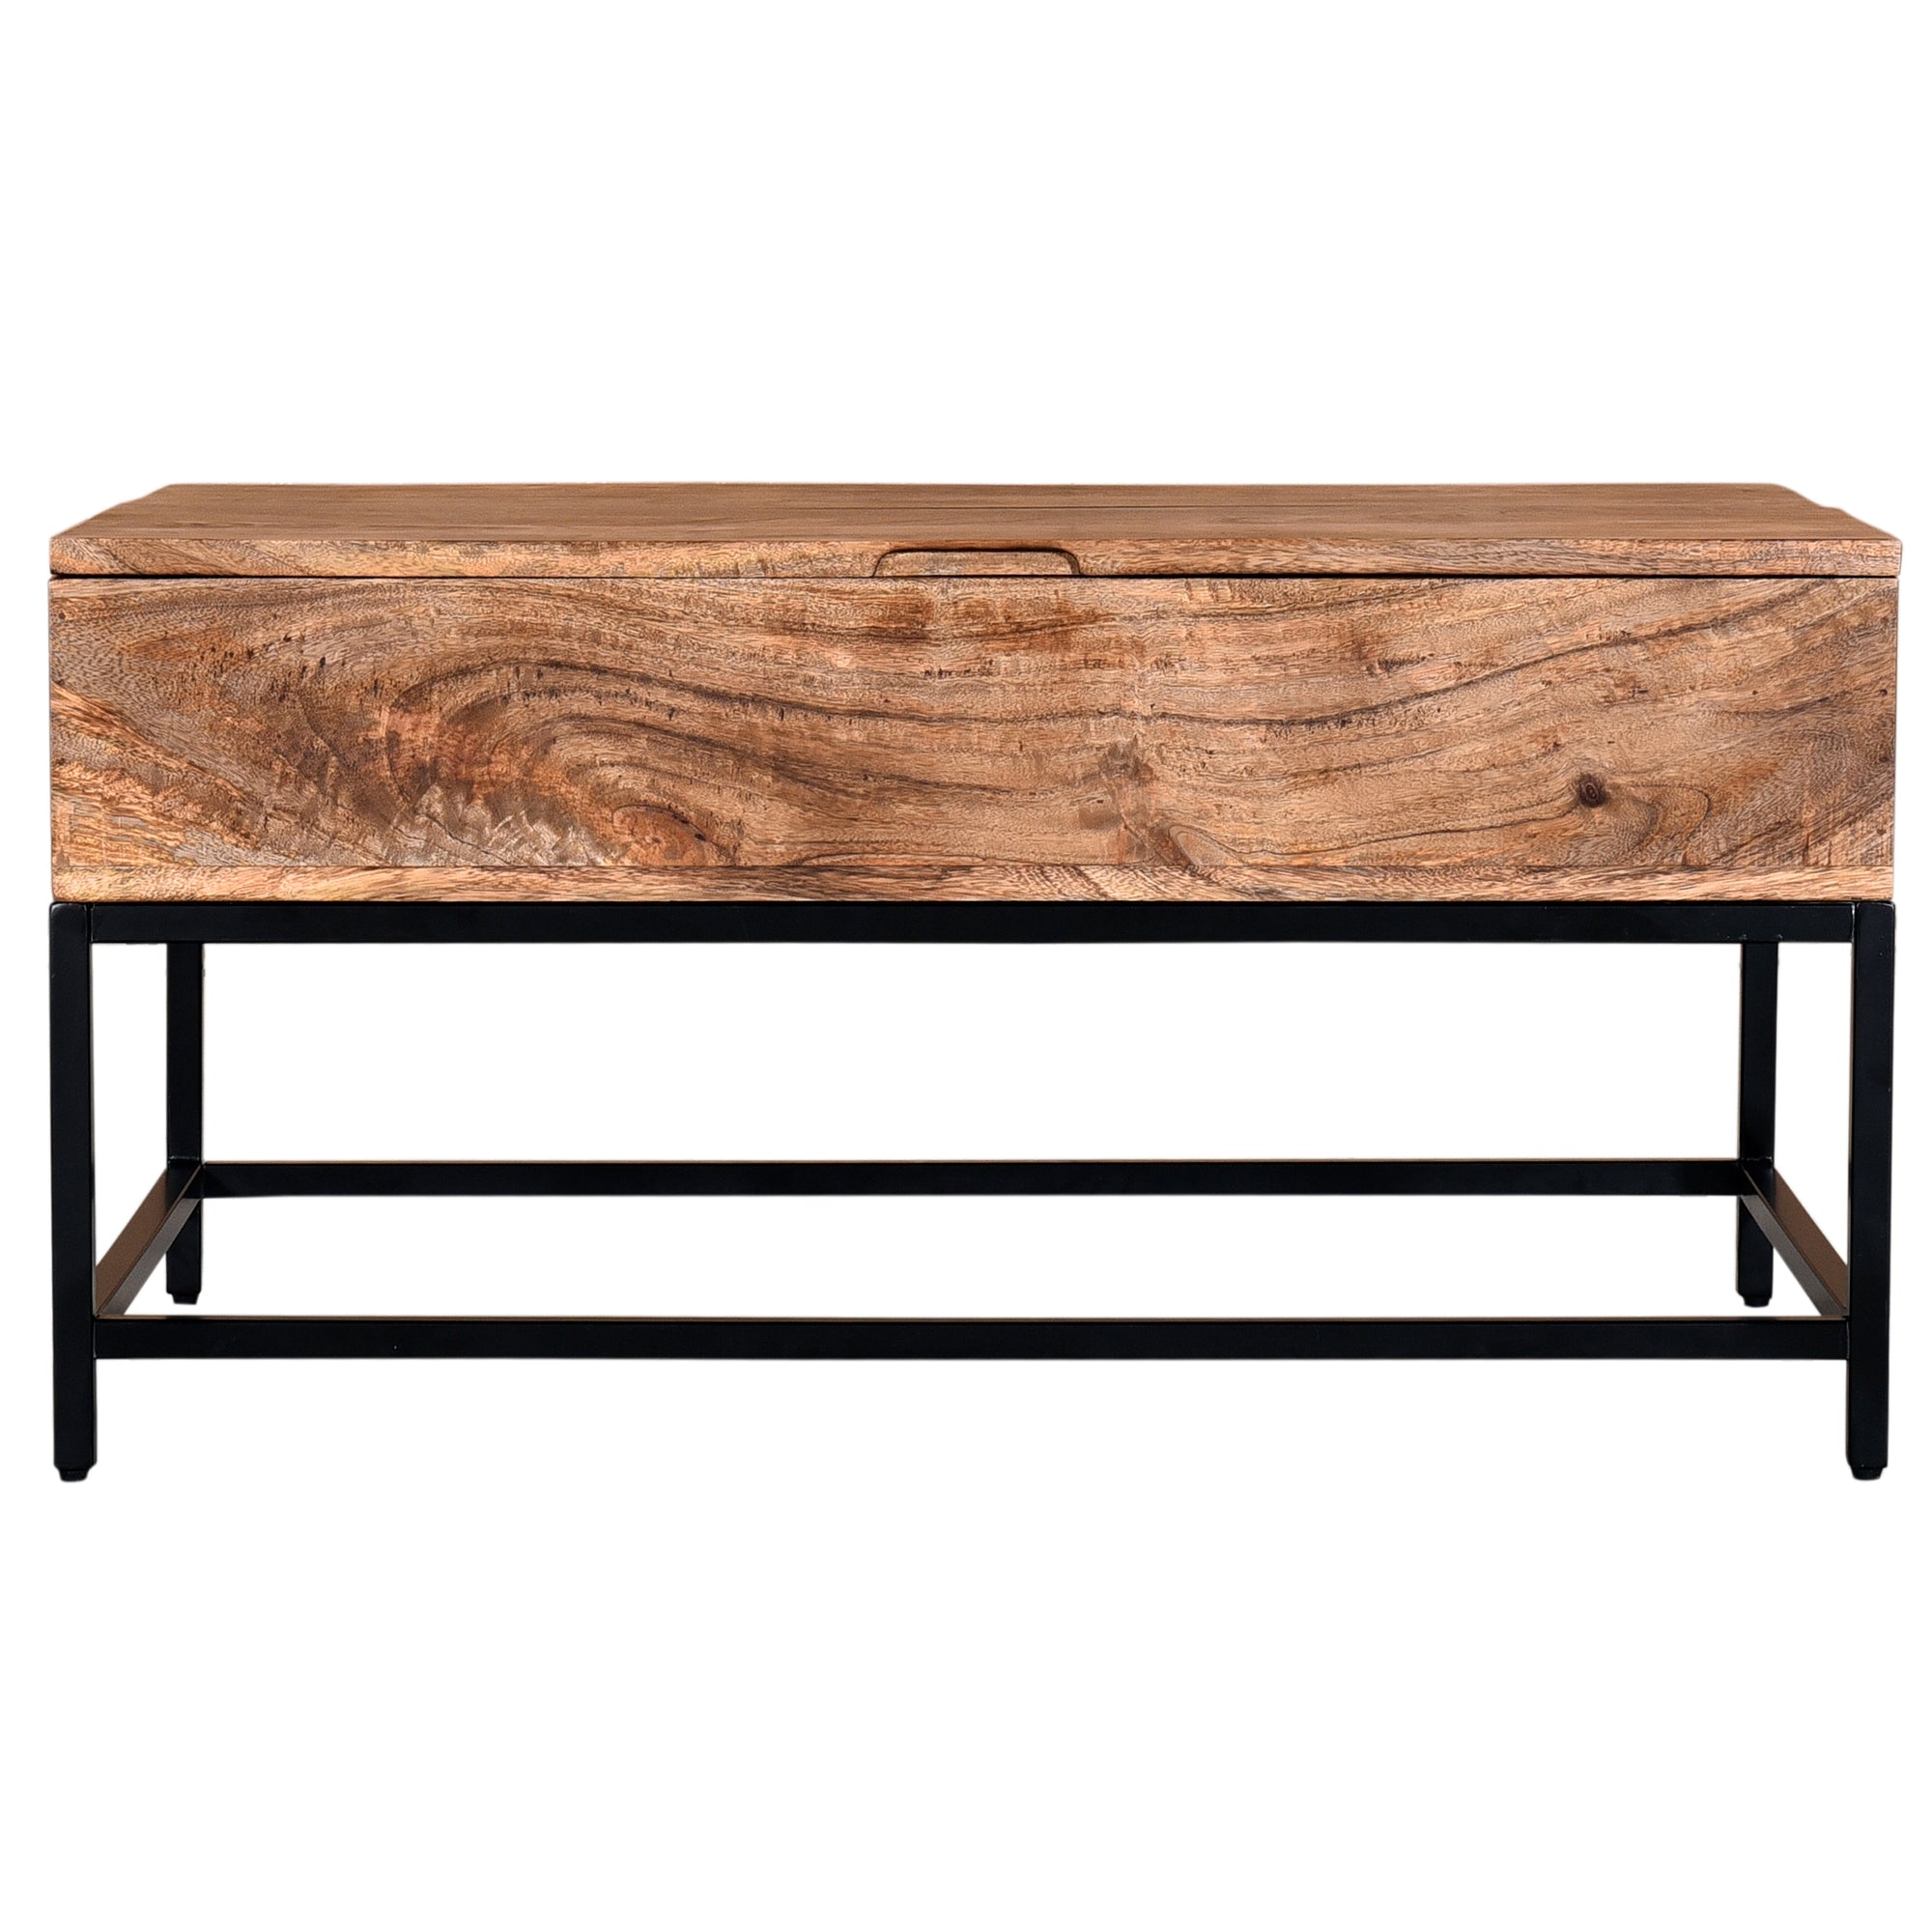 OJAS-LIFT-TOP COFFEE TABLE-NATURAL BURNT